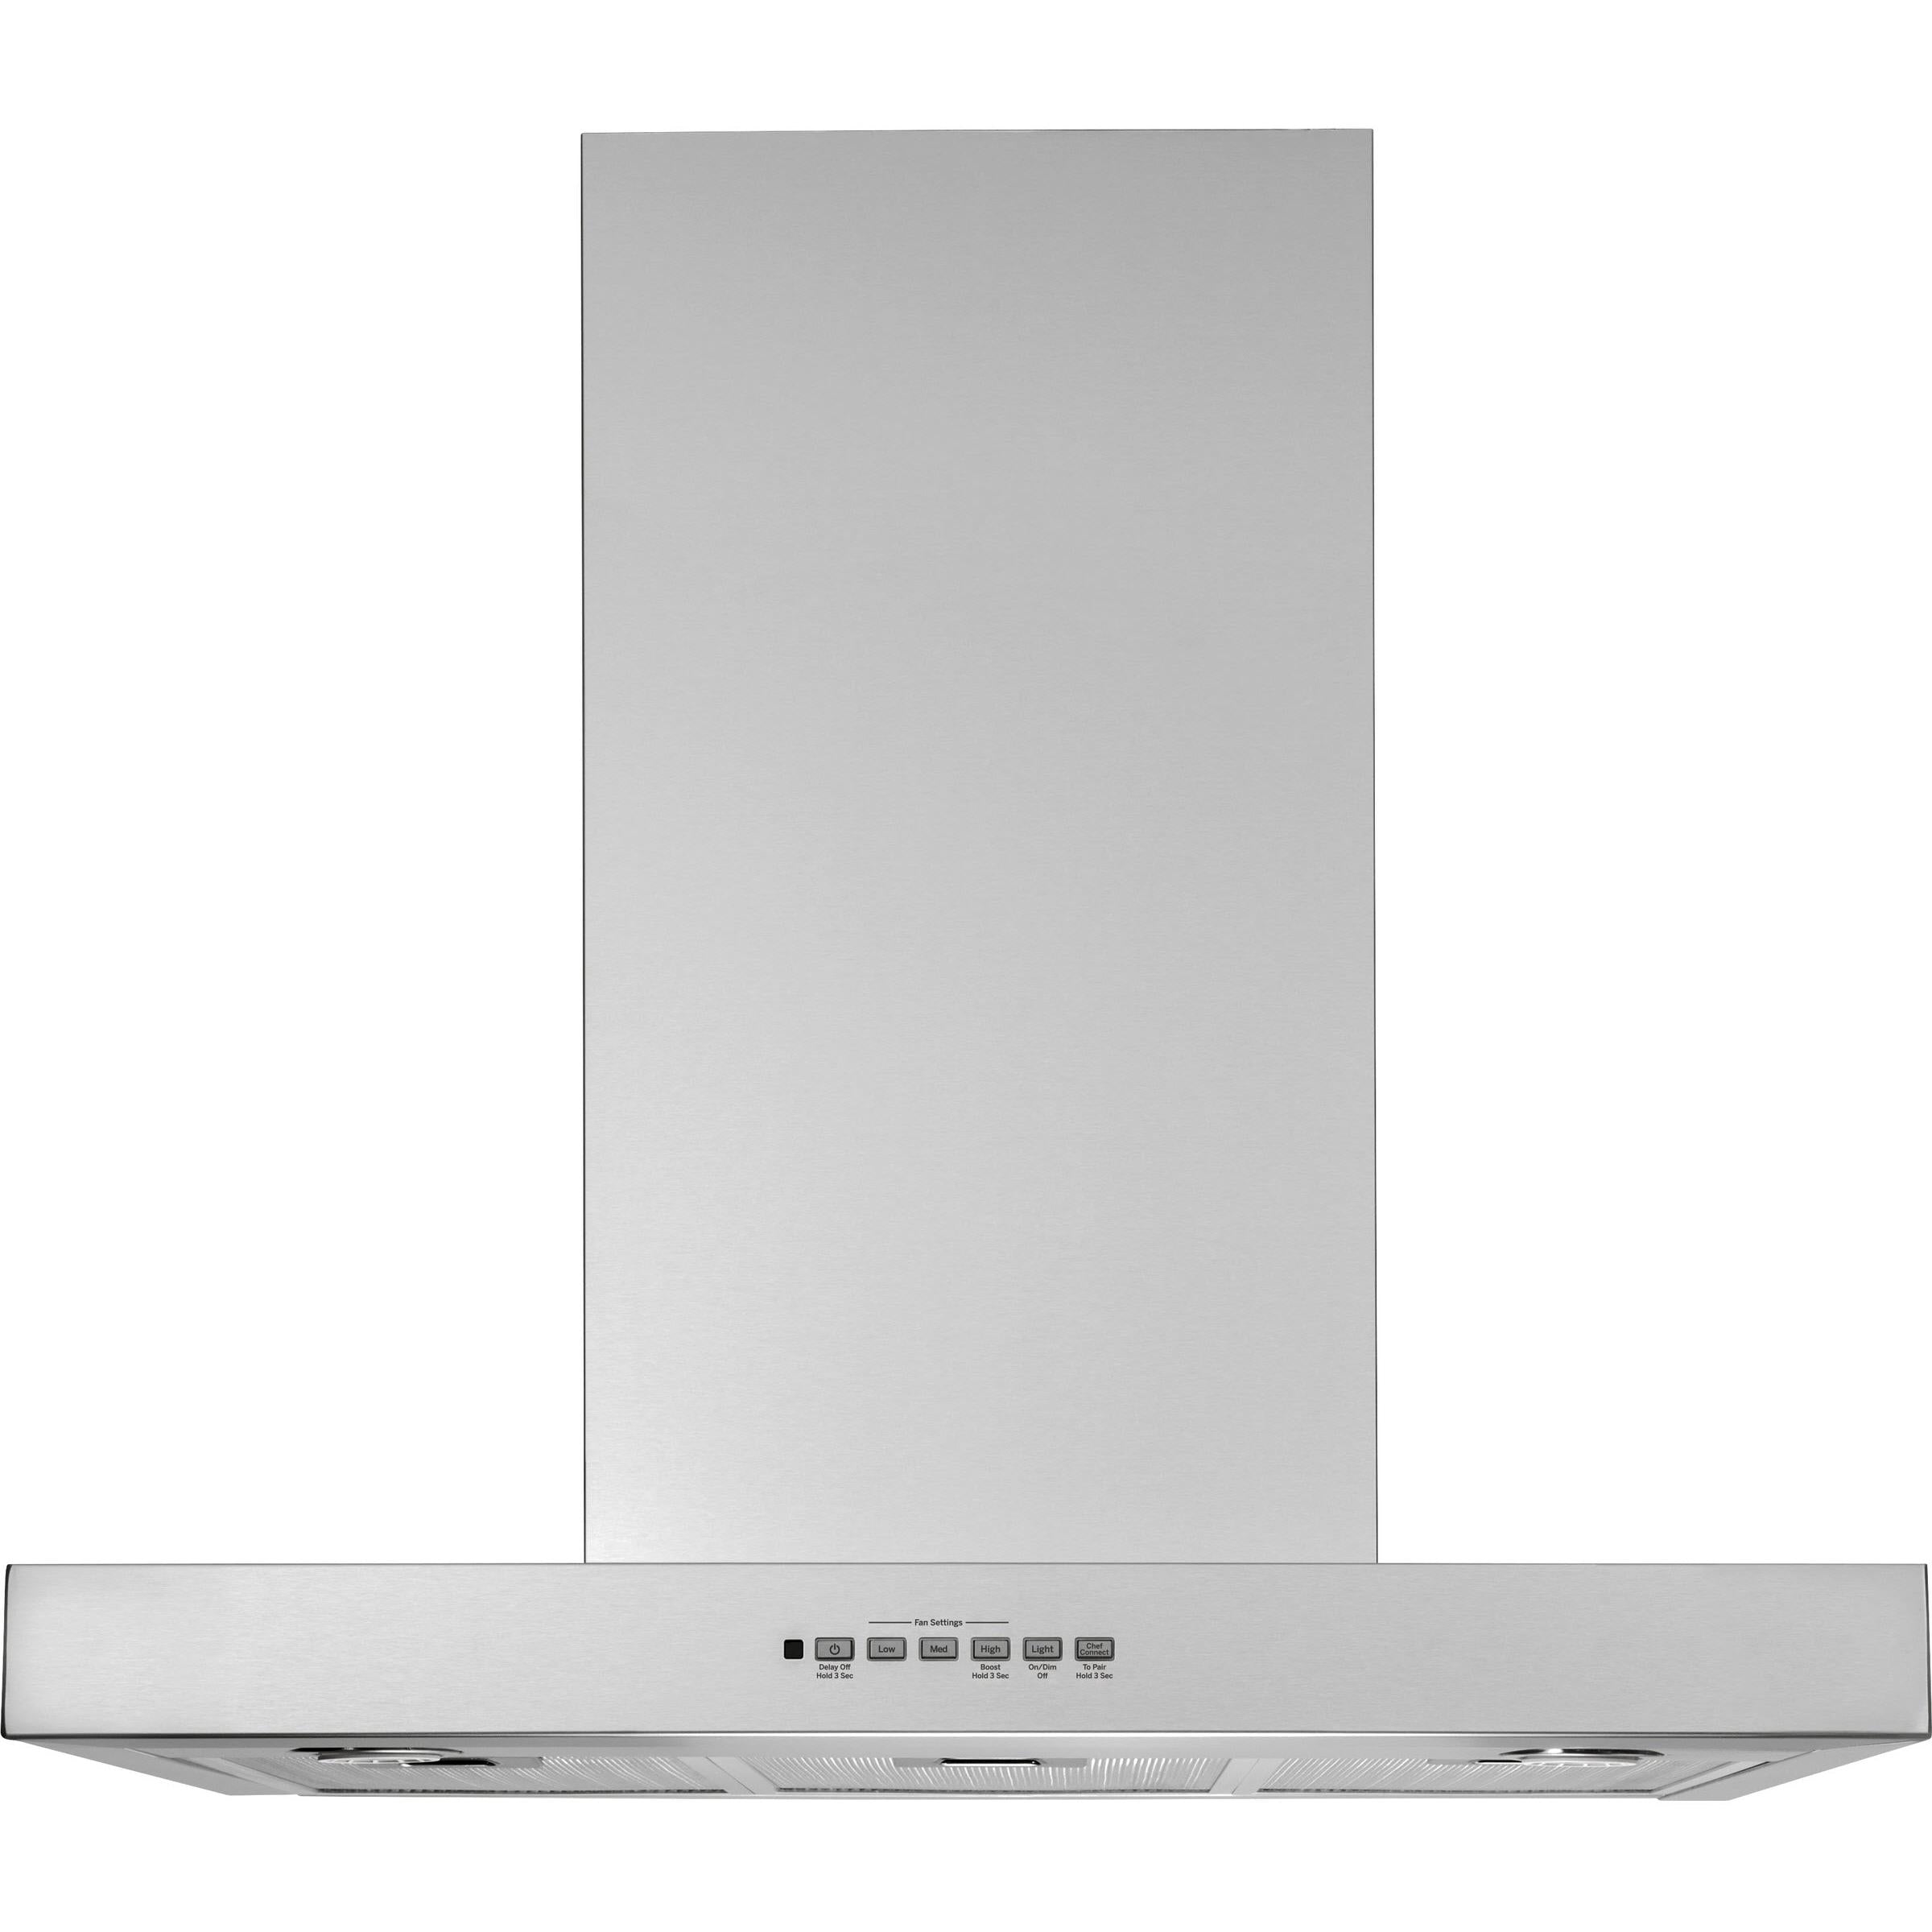 GE 30-inch Wall Mount Range Hood with Chef Connect UVW8301SLSS